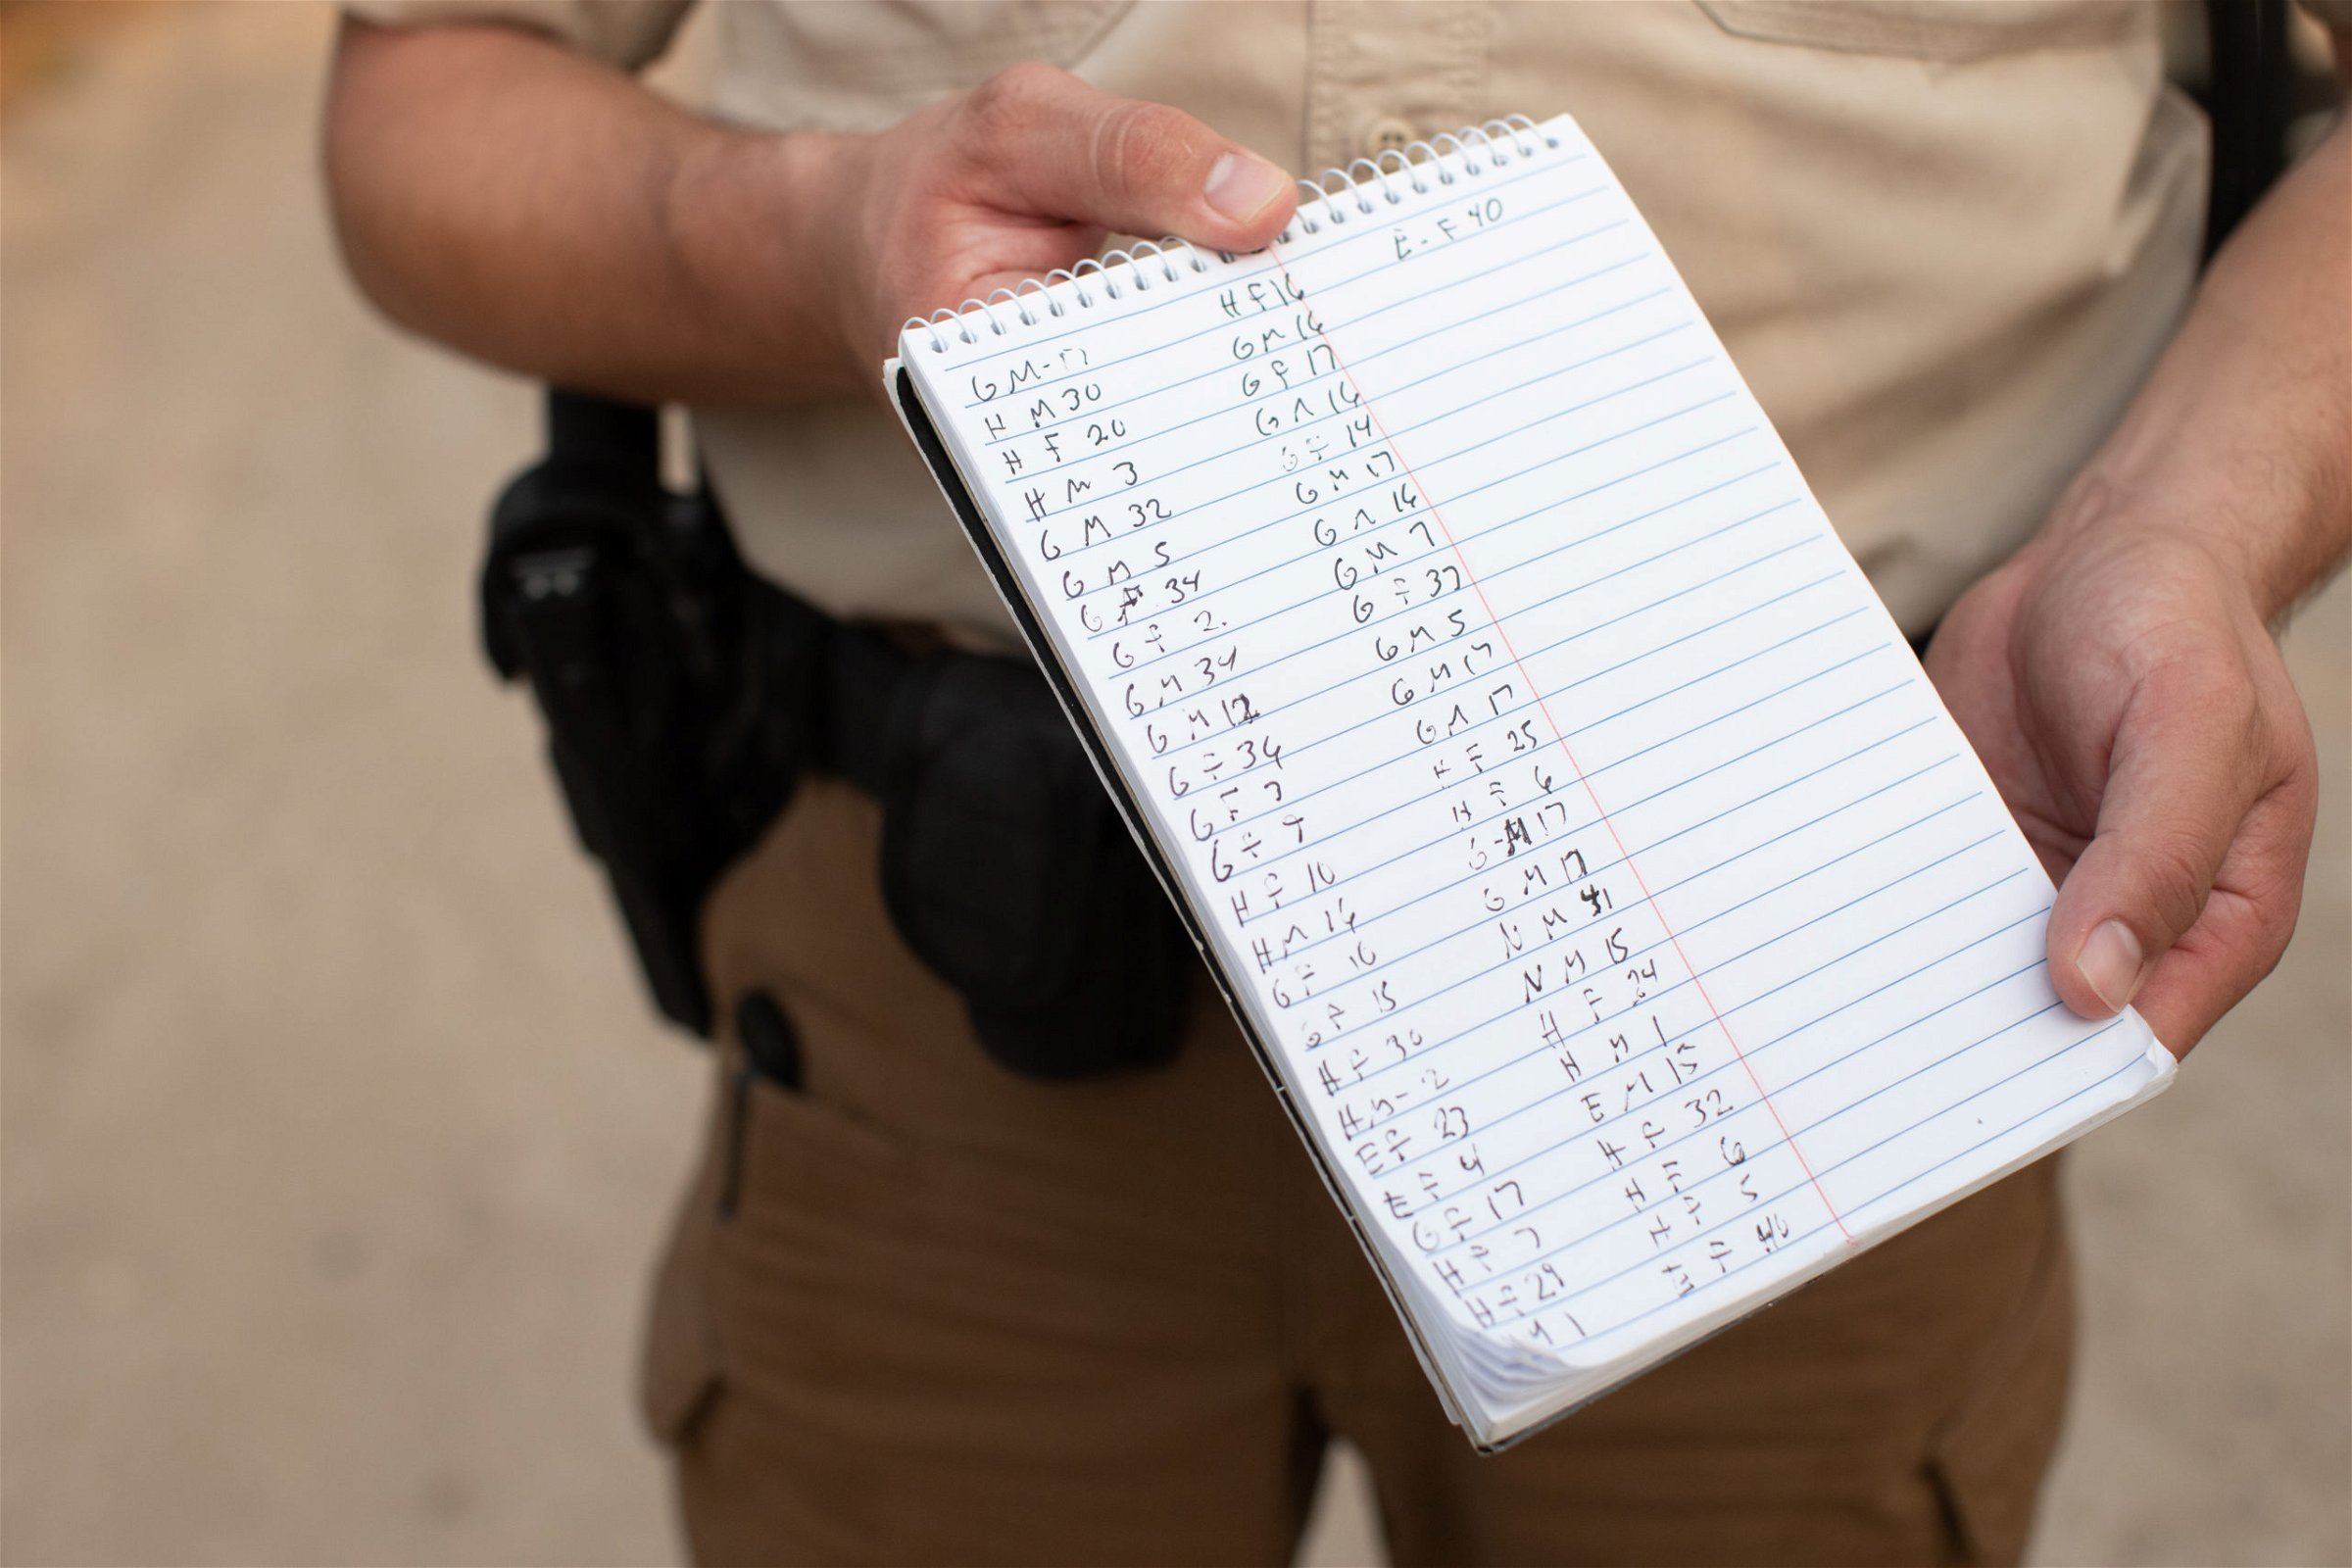 An official with the Hidalgo County Constable's office shows a notepad used to gather biometric data from illegal immigrants shortly after they were smuggled into the U.S. in Rincon Village near McAllen, Texas, on March 24, 2021. (Kaylee Greenlee. - Daily Caller News Foundation)